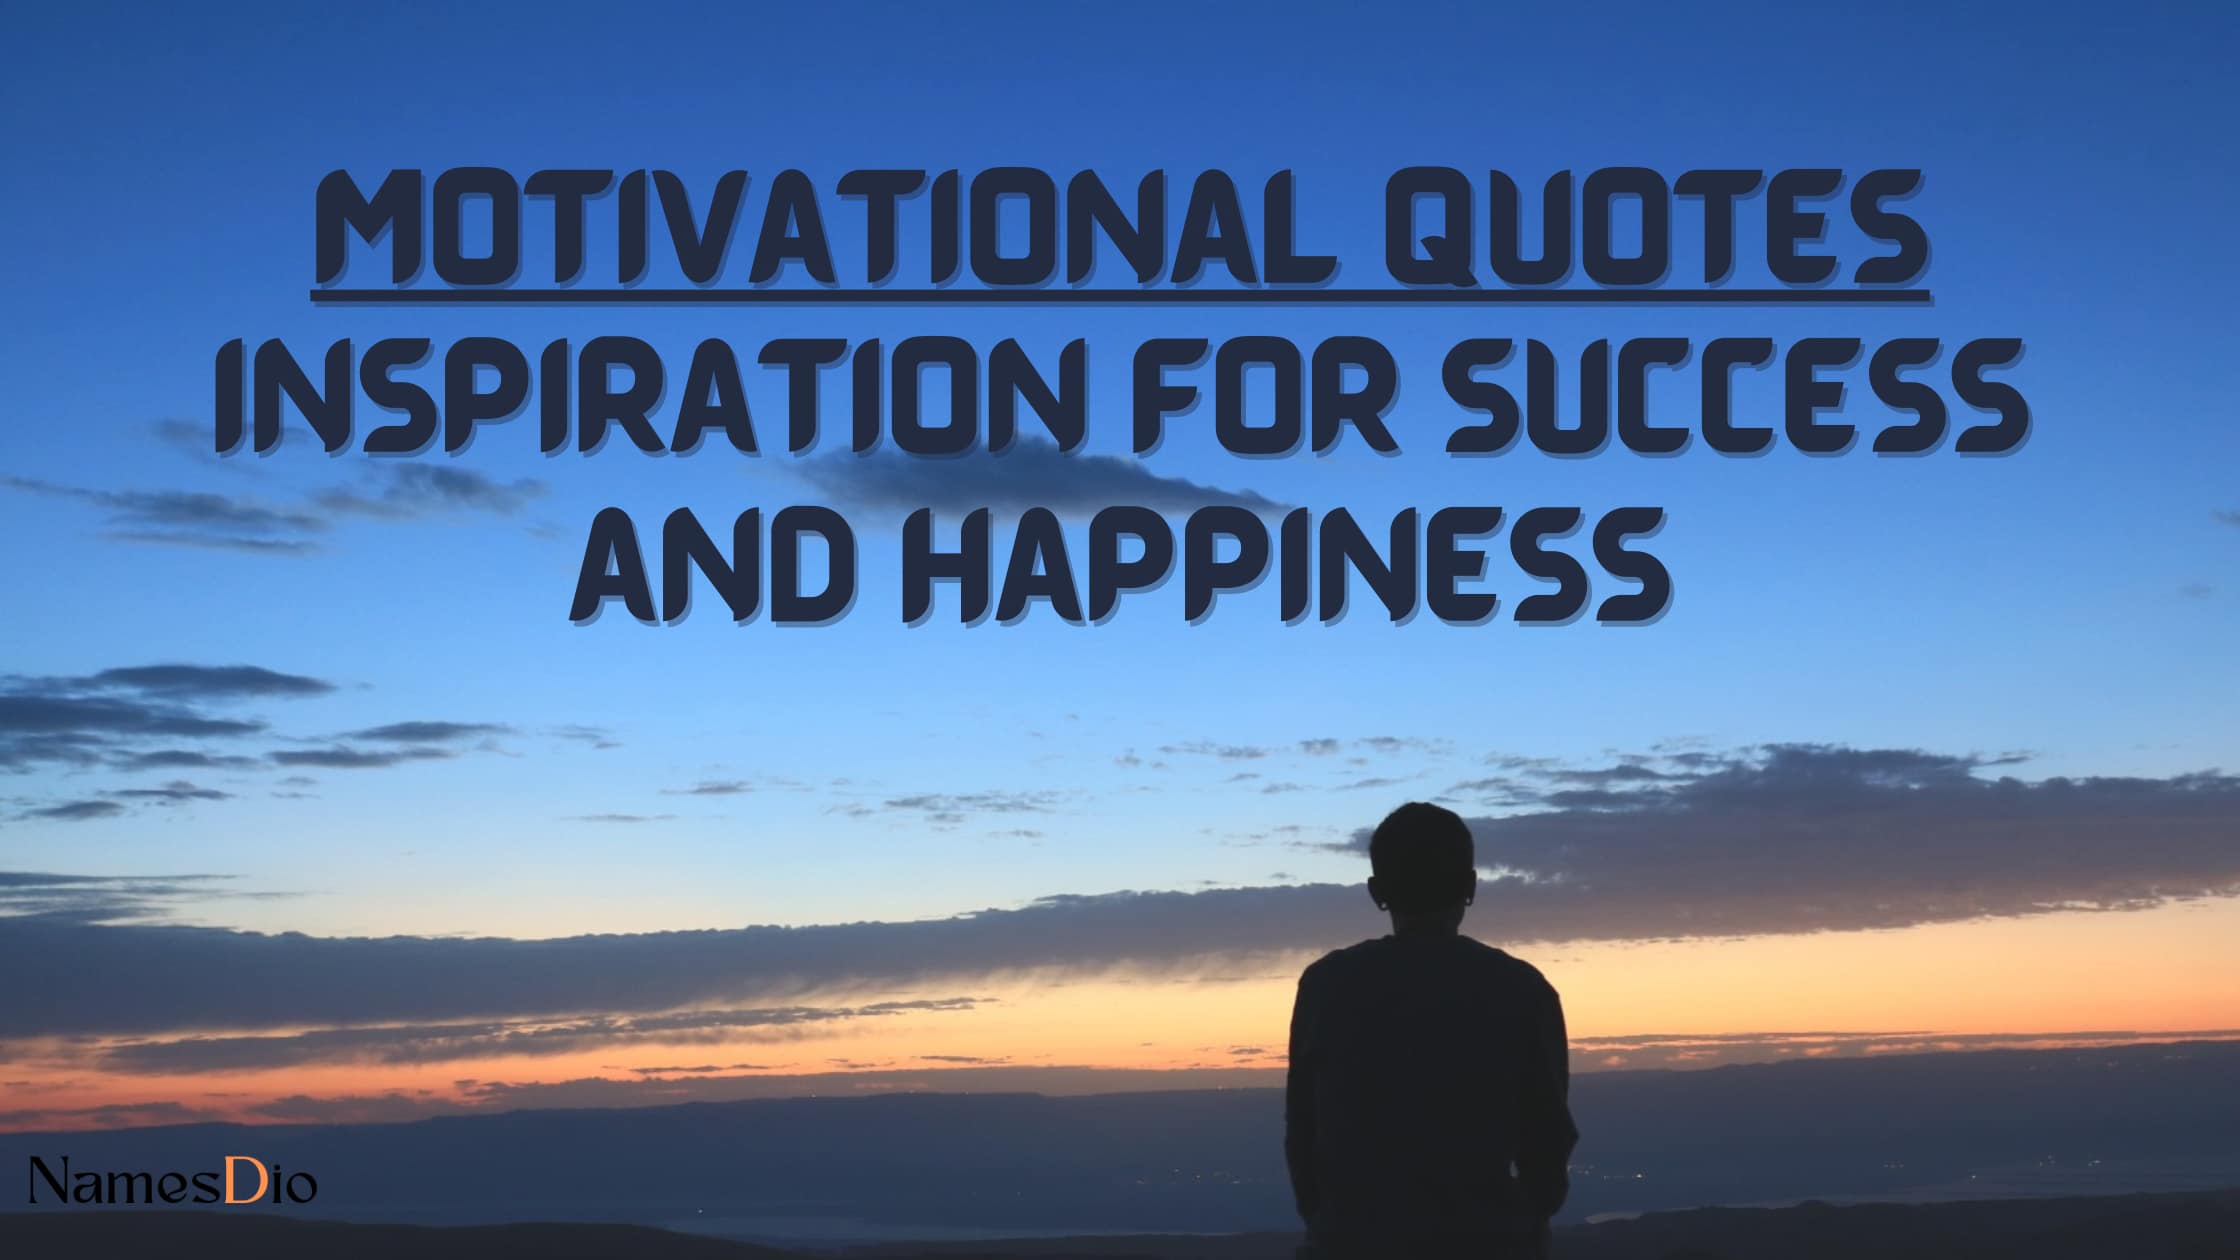 1000+ Motivational Quotes: Inspiration for Success and Happiness - Namesdio